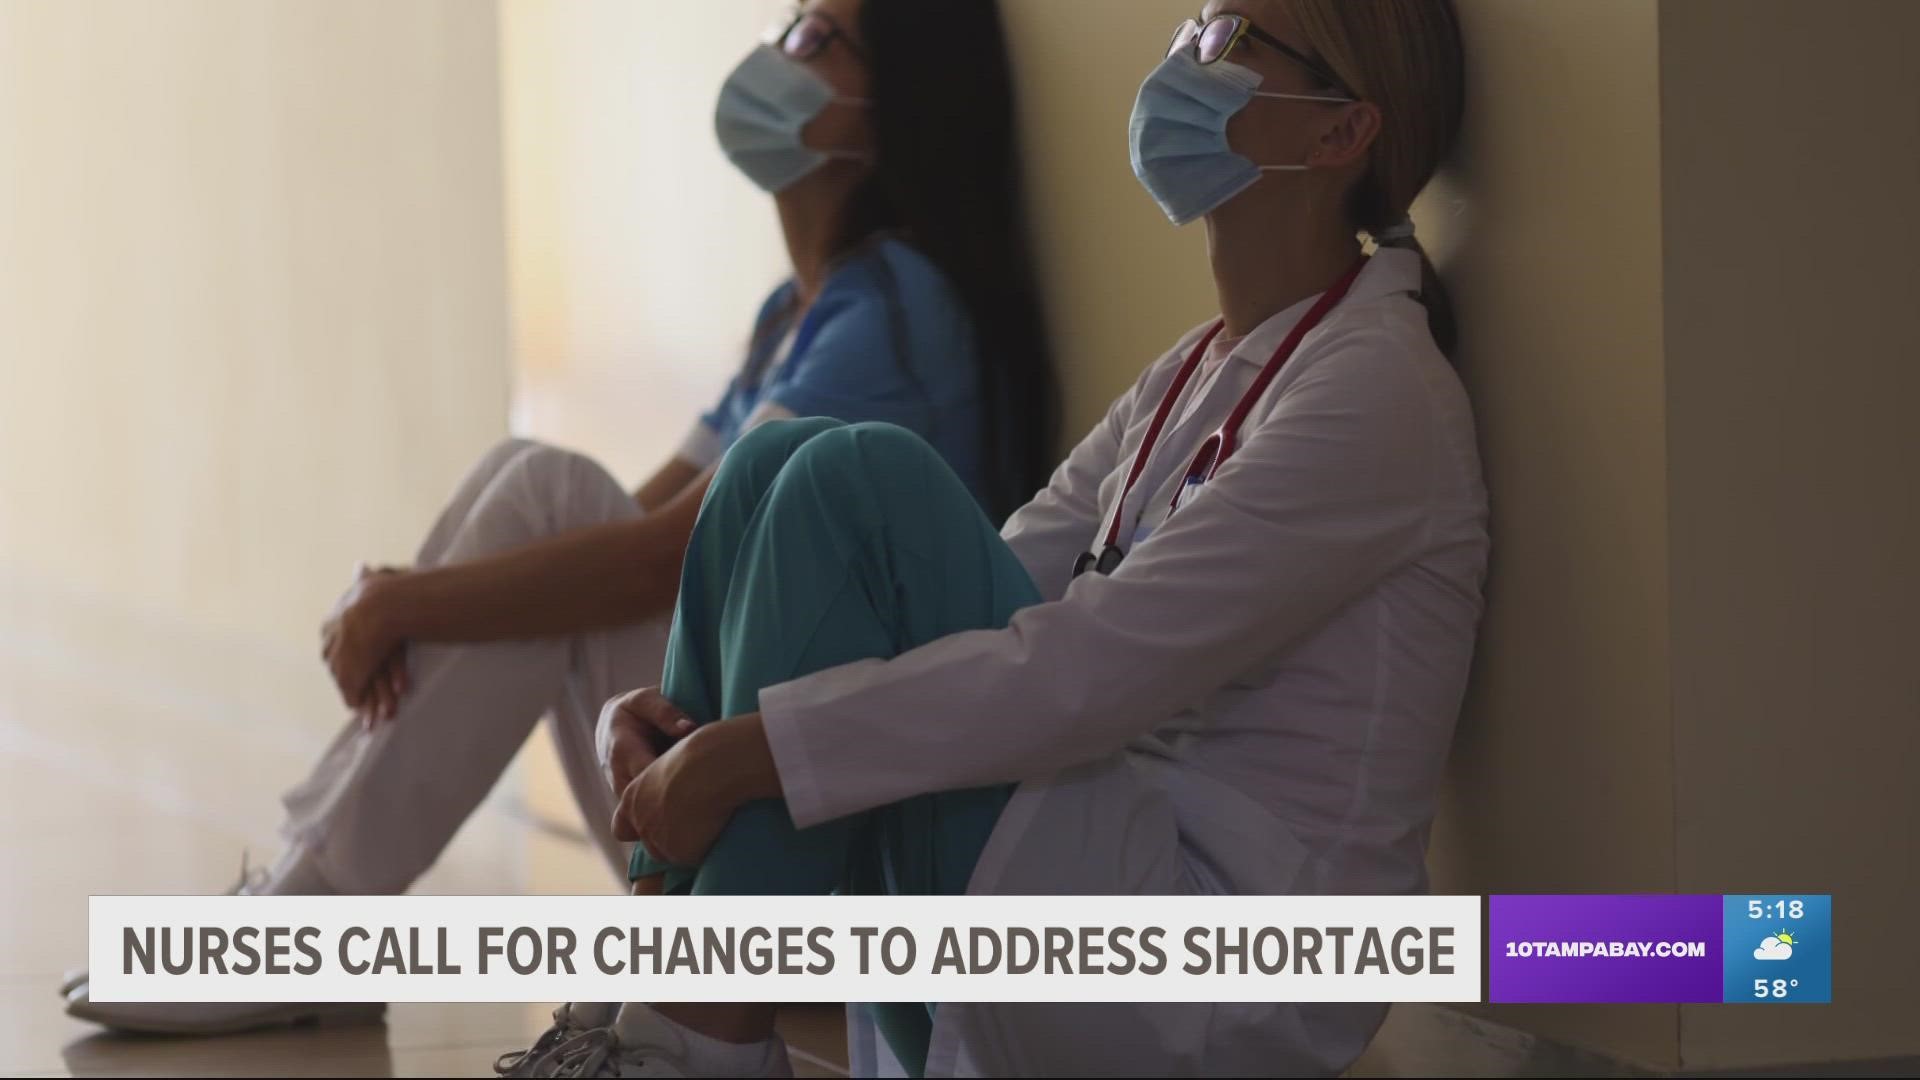 A report released by the Florida Hospital Association in 2021 predicts Florida will face a shortage of more than 59,000 nurses by 2035.